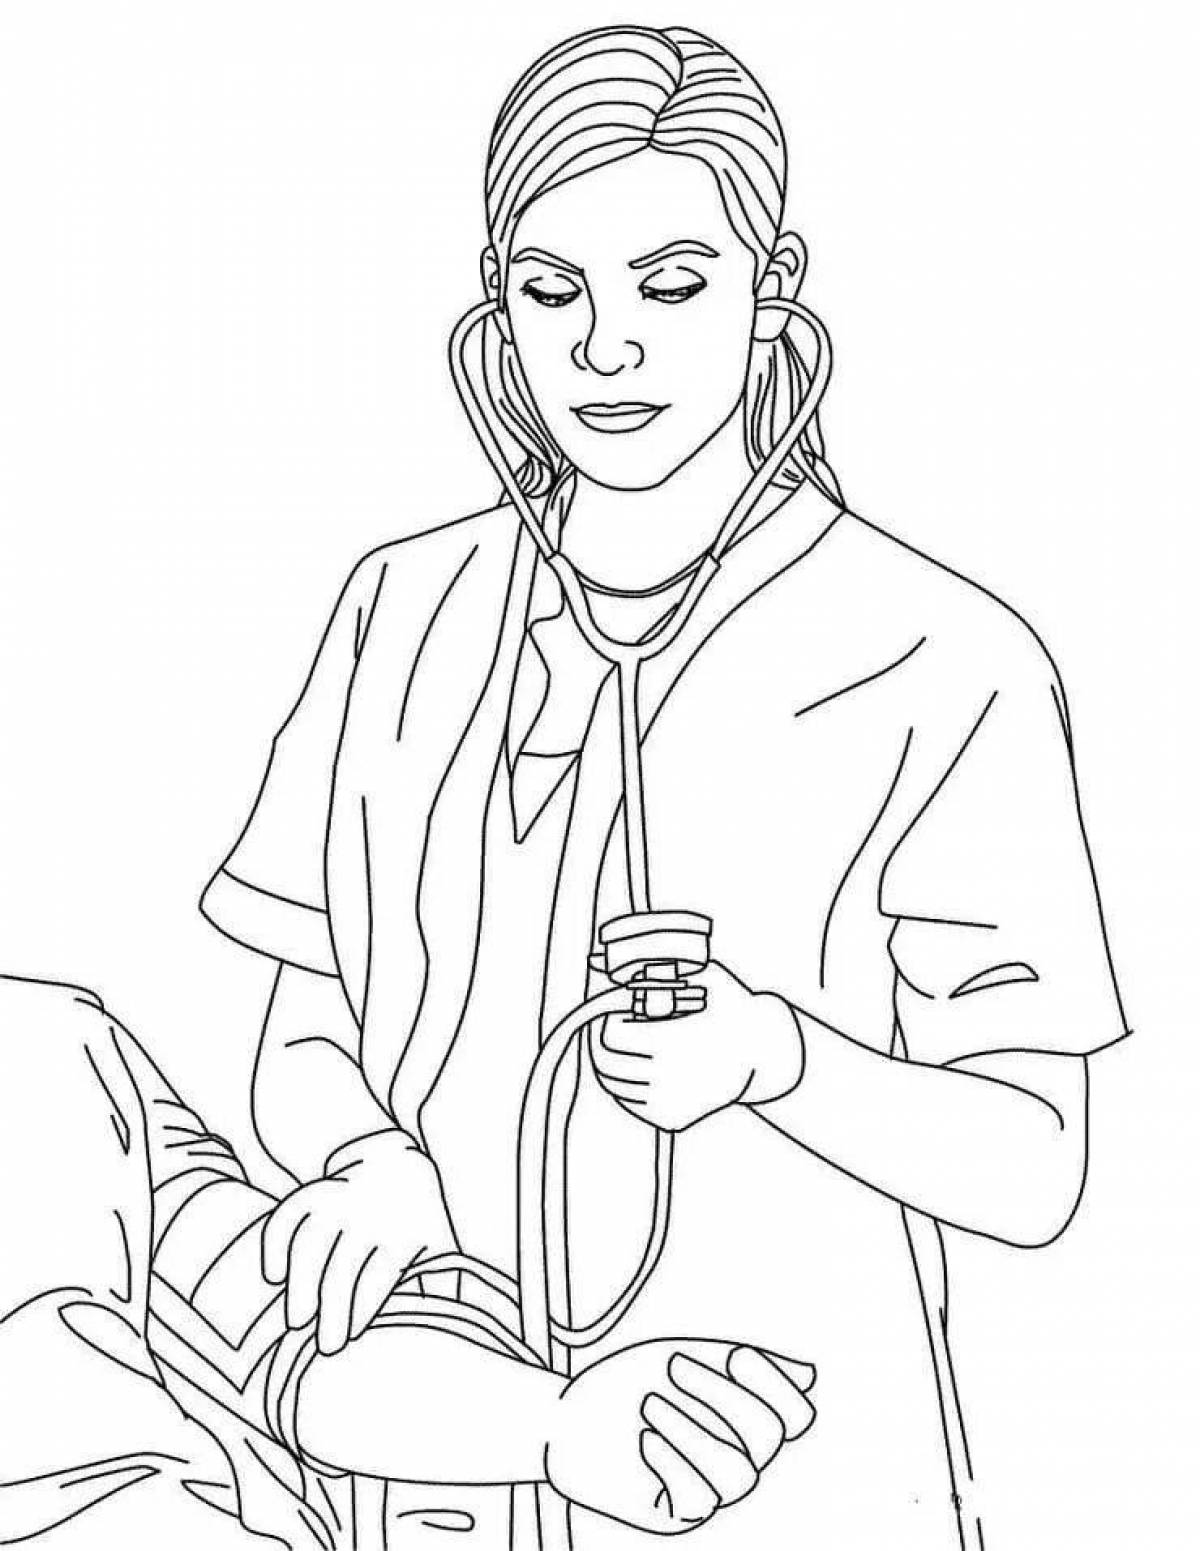 Exciting doctor profession coloring page